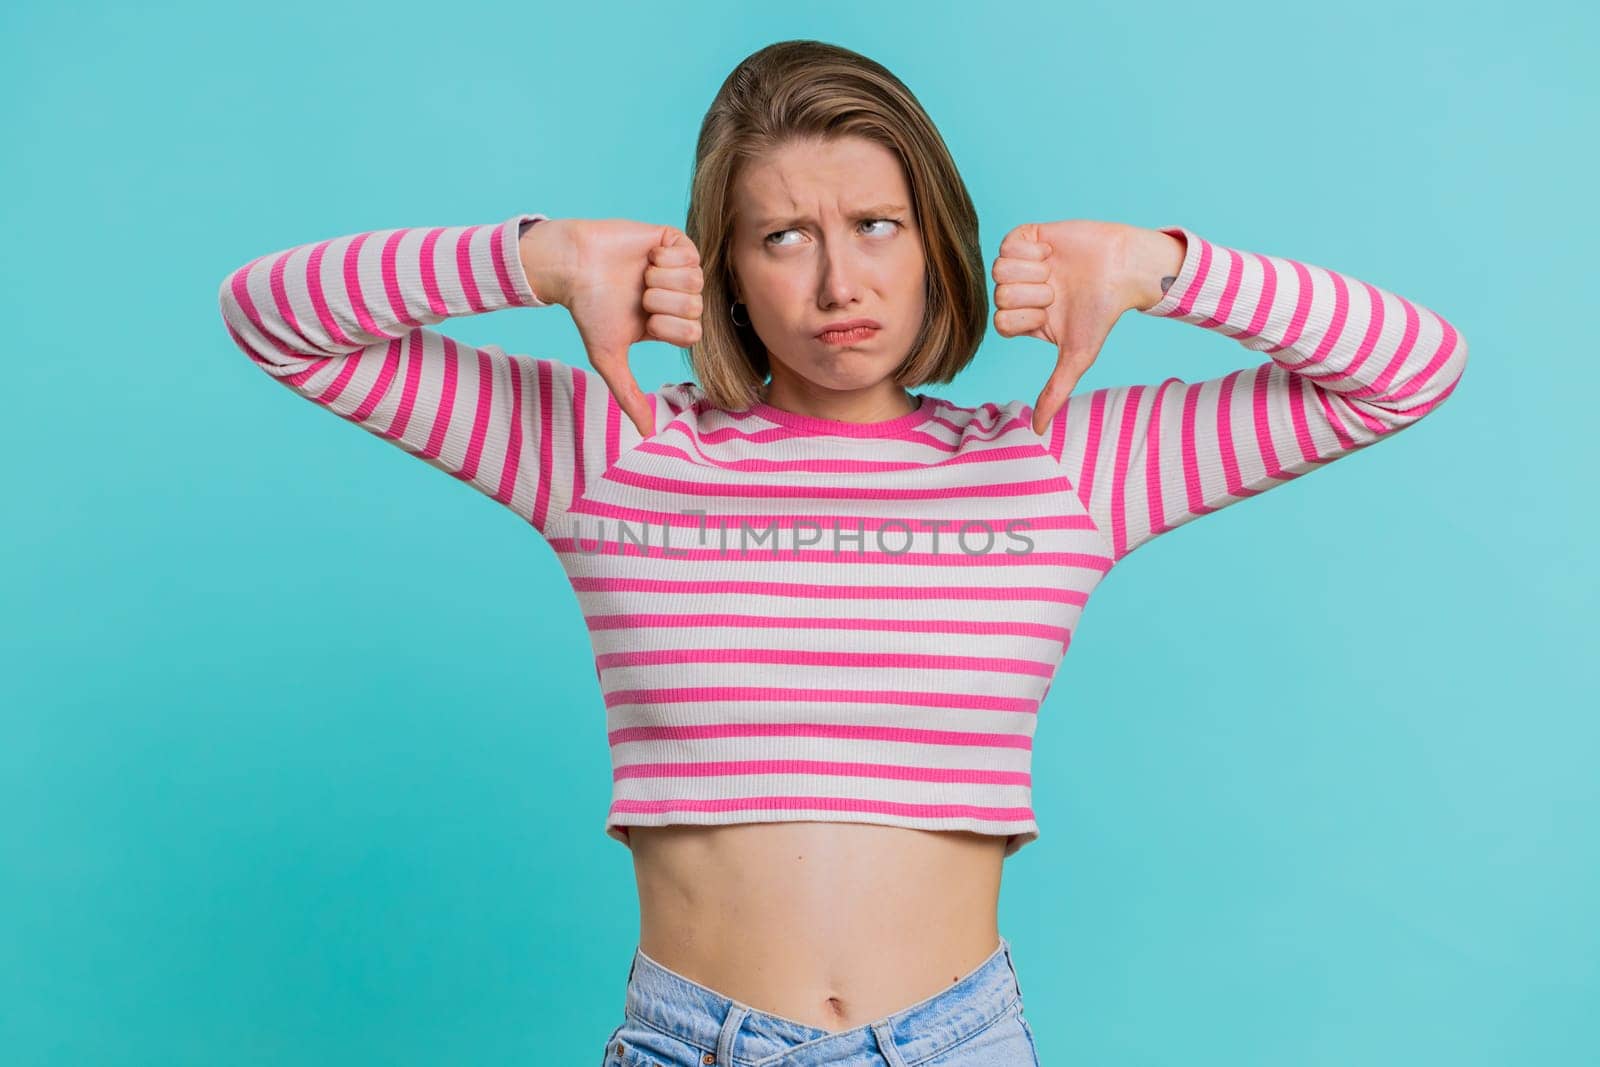 Dislike. Upset unhappy young woman showing thumbs down sign gesture, expressing discontent, disapproval, dissatisfied, dislike. Pretty girl in crop top. Indoors isolated on blue studio background